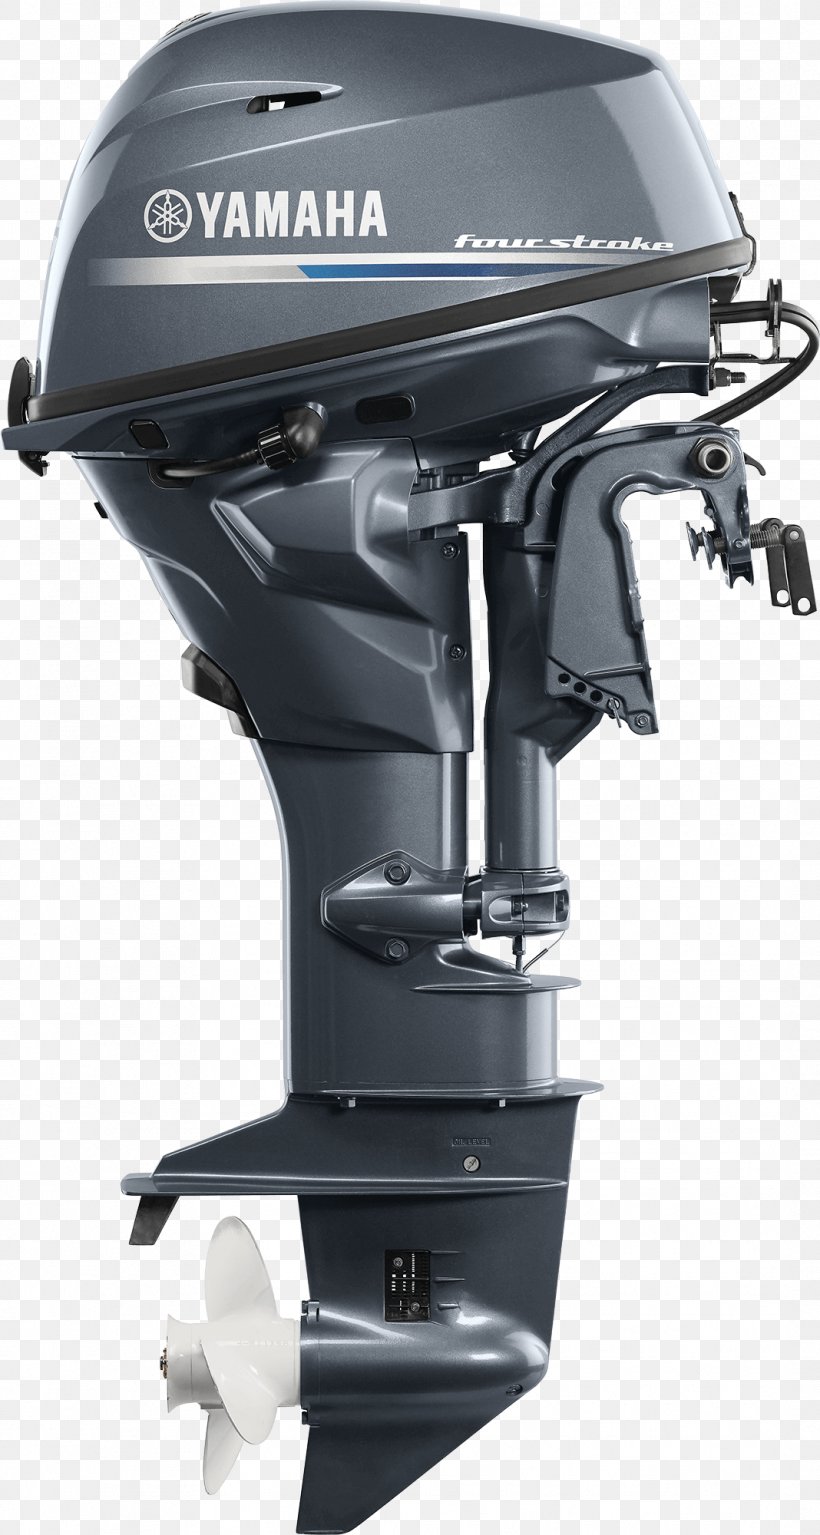 Yamaha Motor Company Outboard Motor Boat Engine Yamaha Corporation, PNG, 1068x2000px, Yamaha Motor Company, Boat, Bombardier Recreational Products, Engine, Evinrude Outboard Motors Download Free